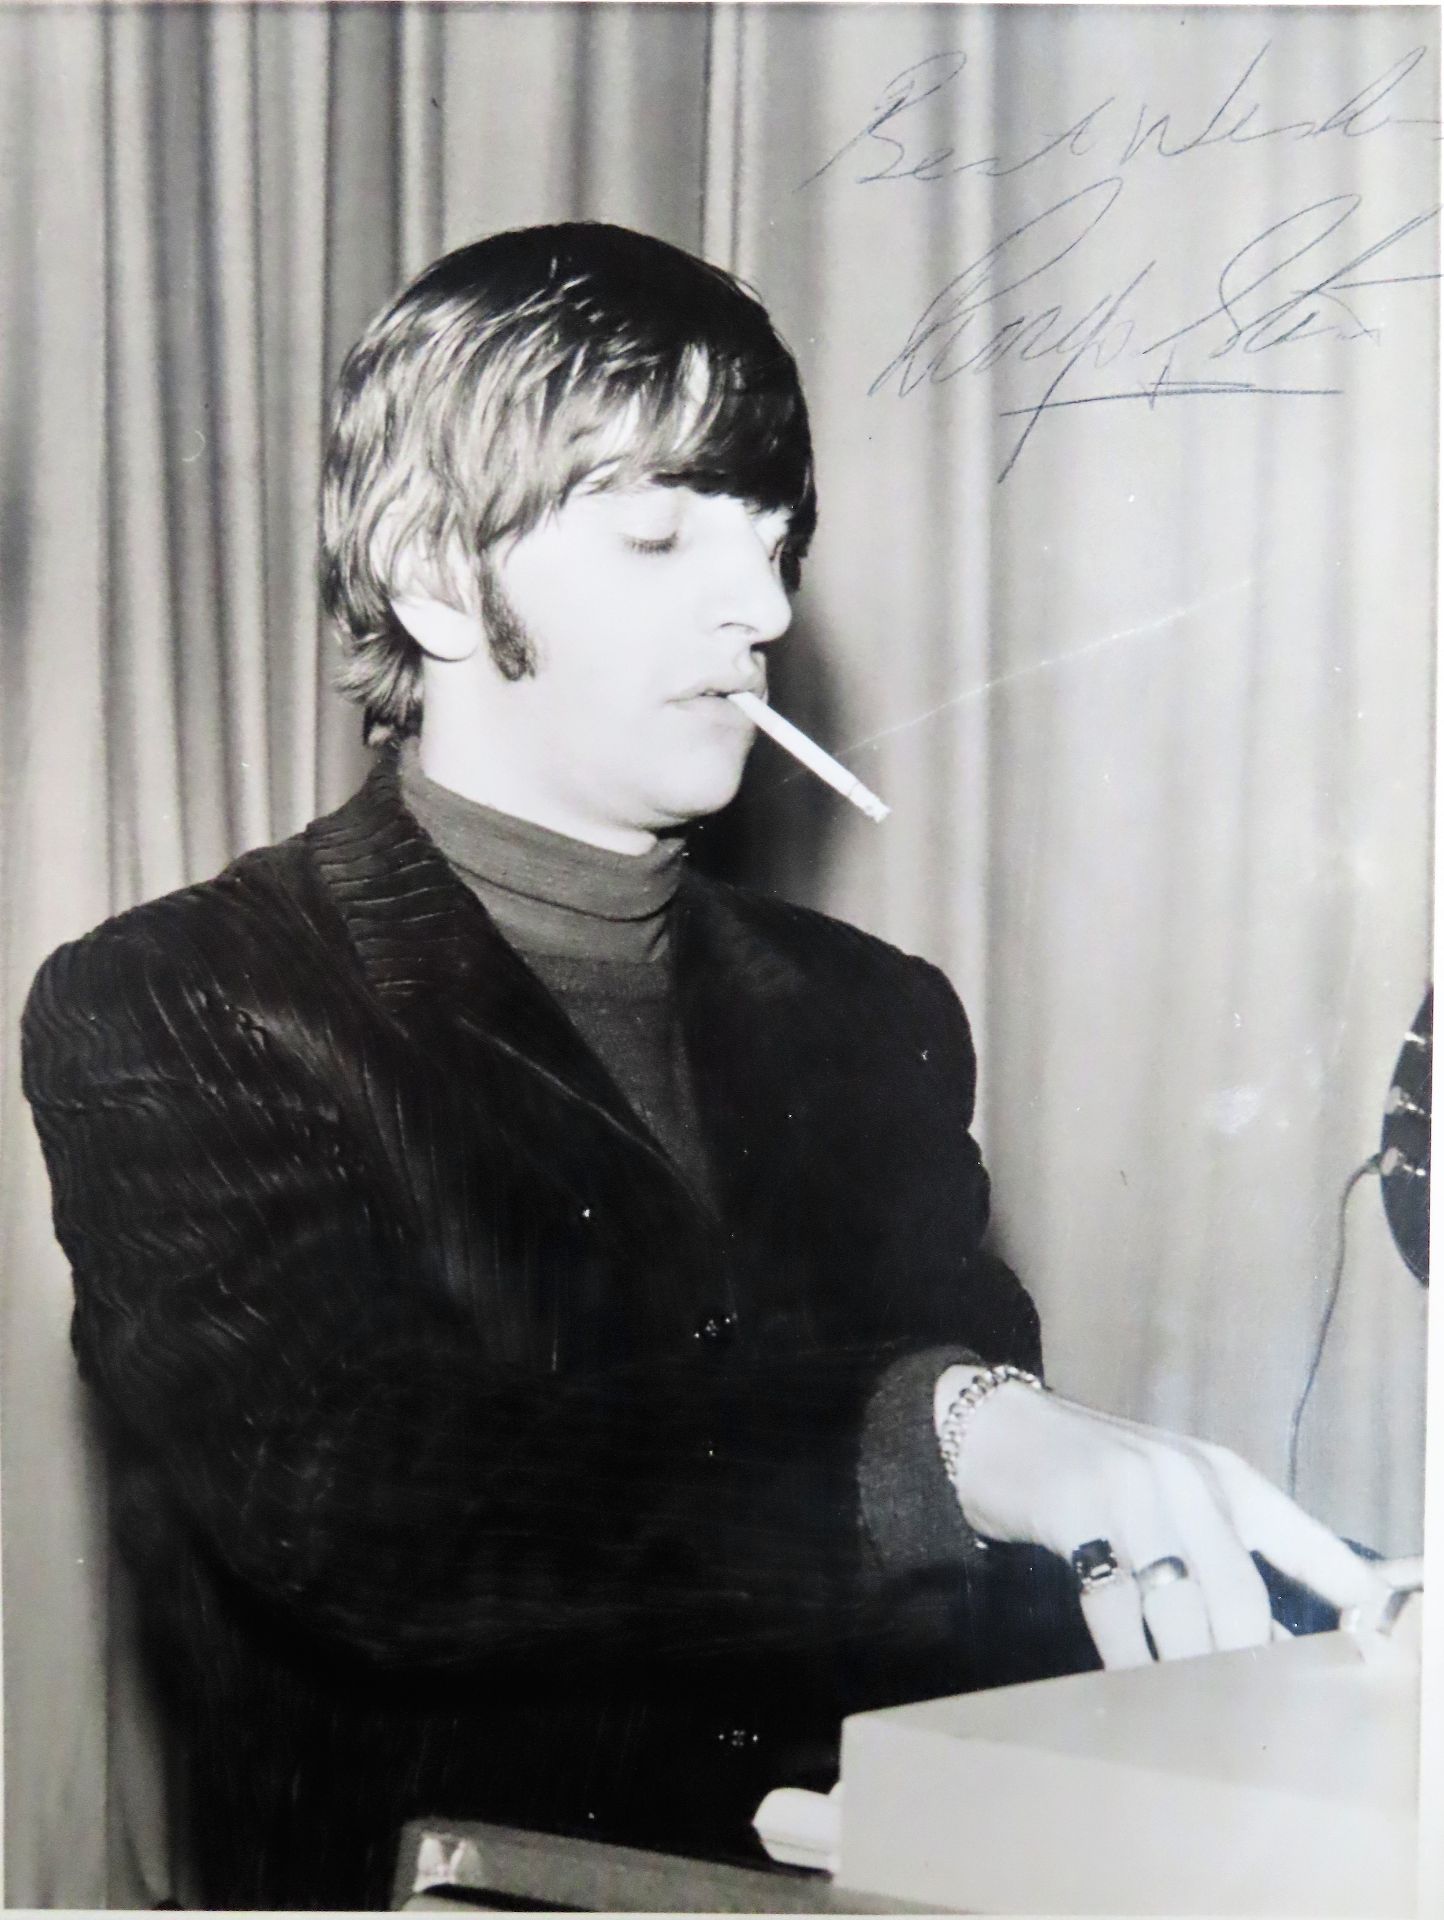 SIGNED ORIGINAL UNPUBLISHED PHOTOGRAPH OF RINGO STARR PLAYING KEYBOARDS, TAKEN AT CAIRD HALL,